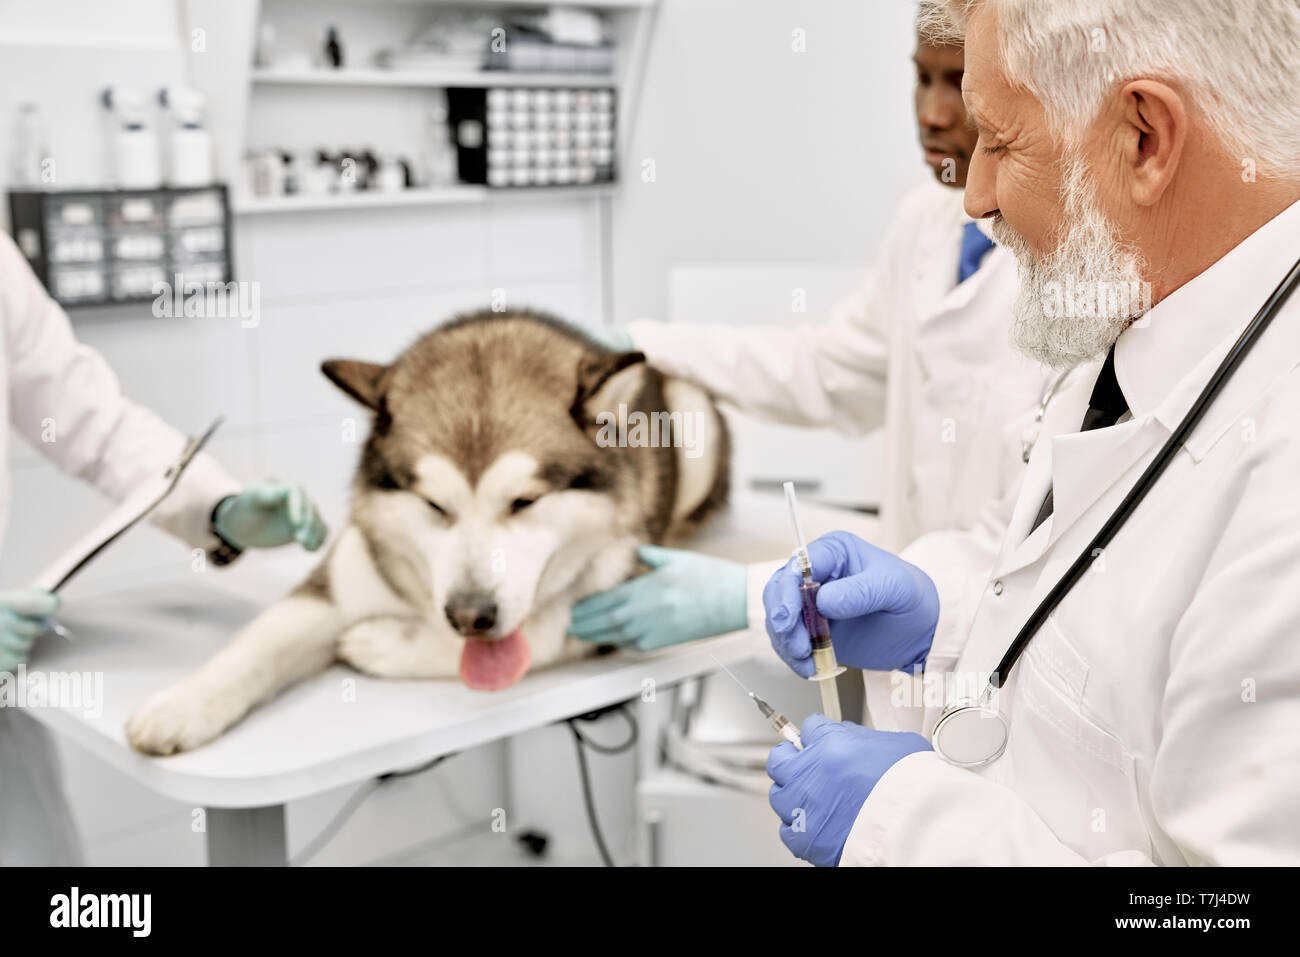 Veterinary doctors preparing for vaccination of big dog. Sad alaskan malamute lying on table in medical cabinet. Elderly doctor wearing in white uniform, blue gloves, holding syringe. Stock Photo